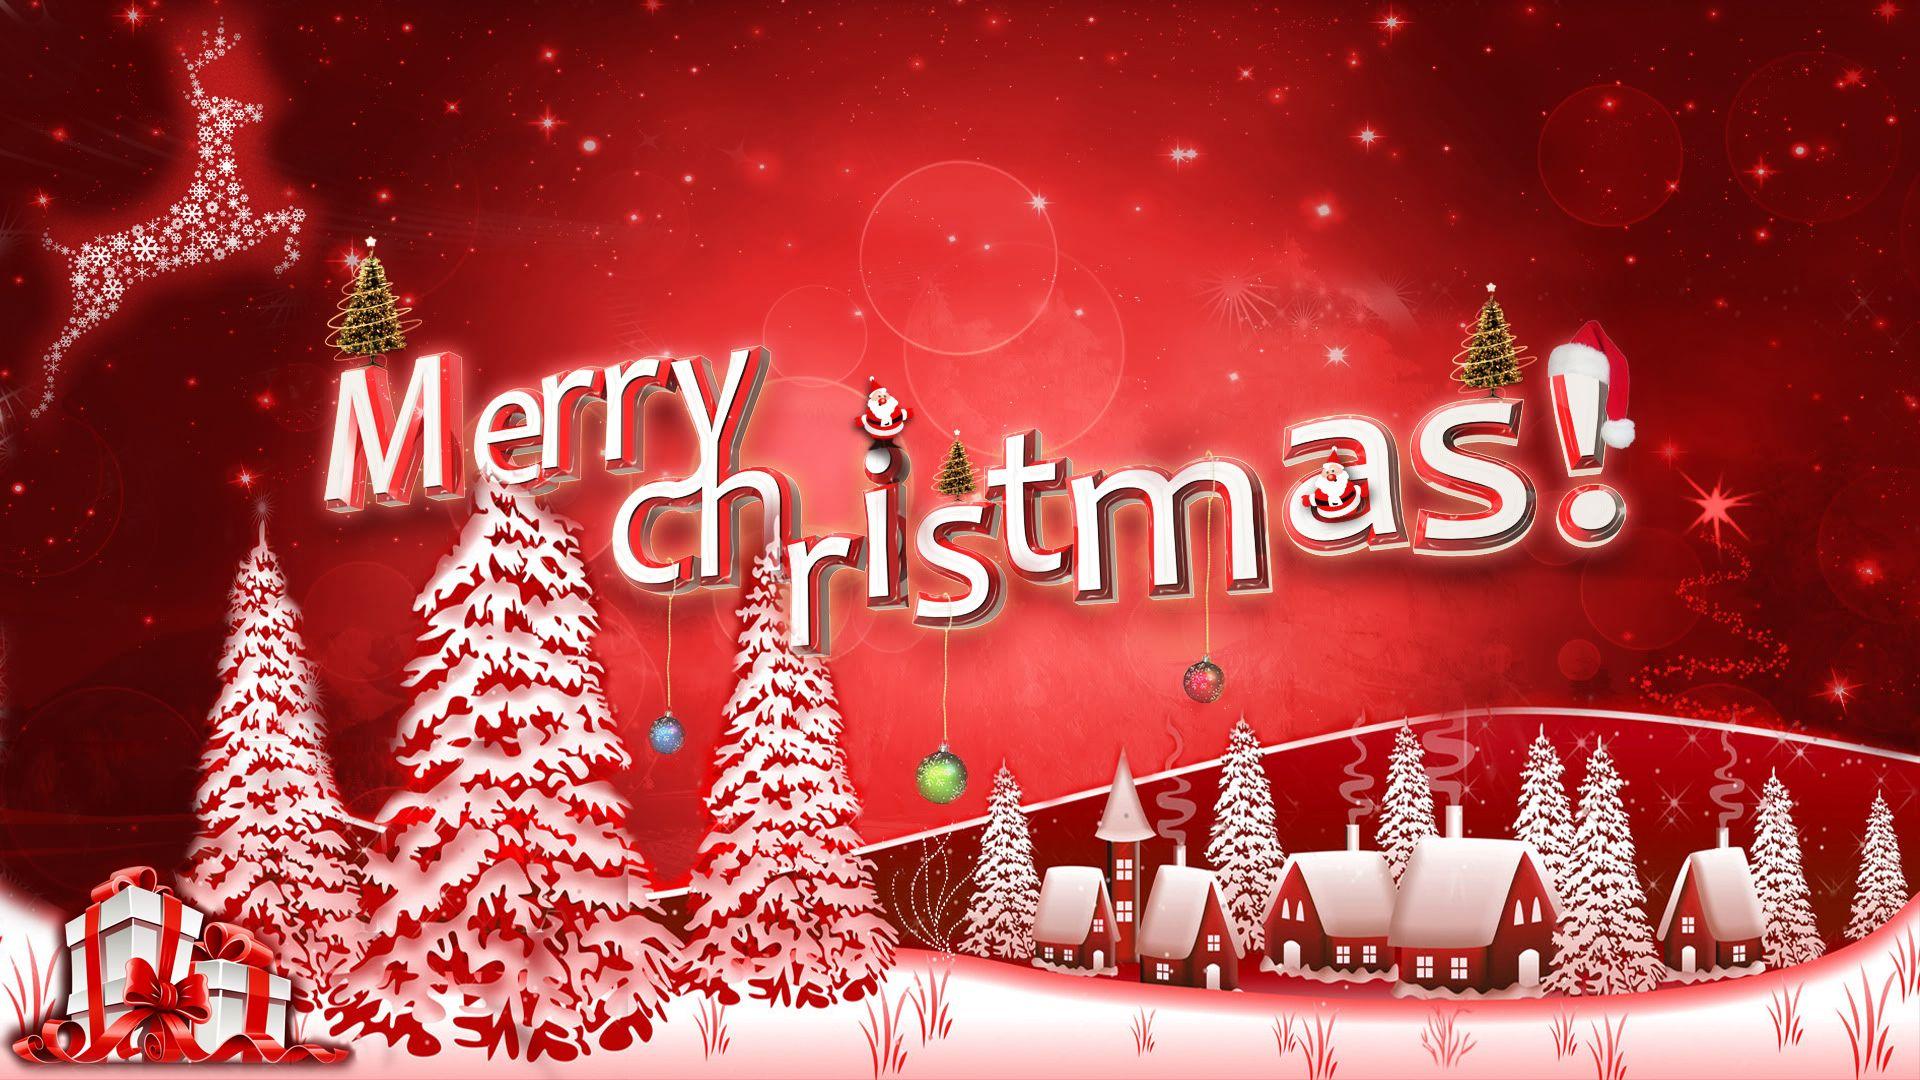 Greetings. Christmas 2015- Wishes, Quotes, Image, Songs and Cards